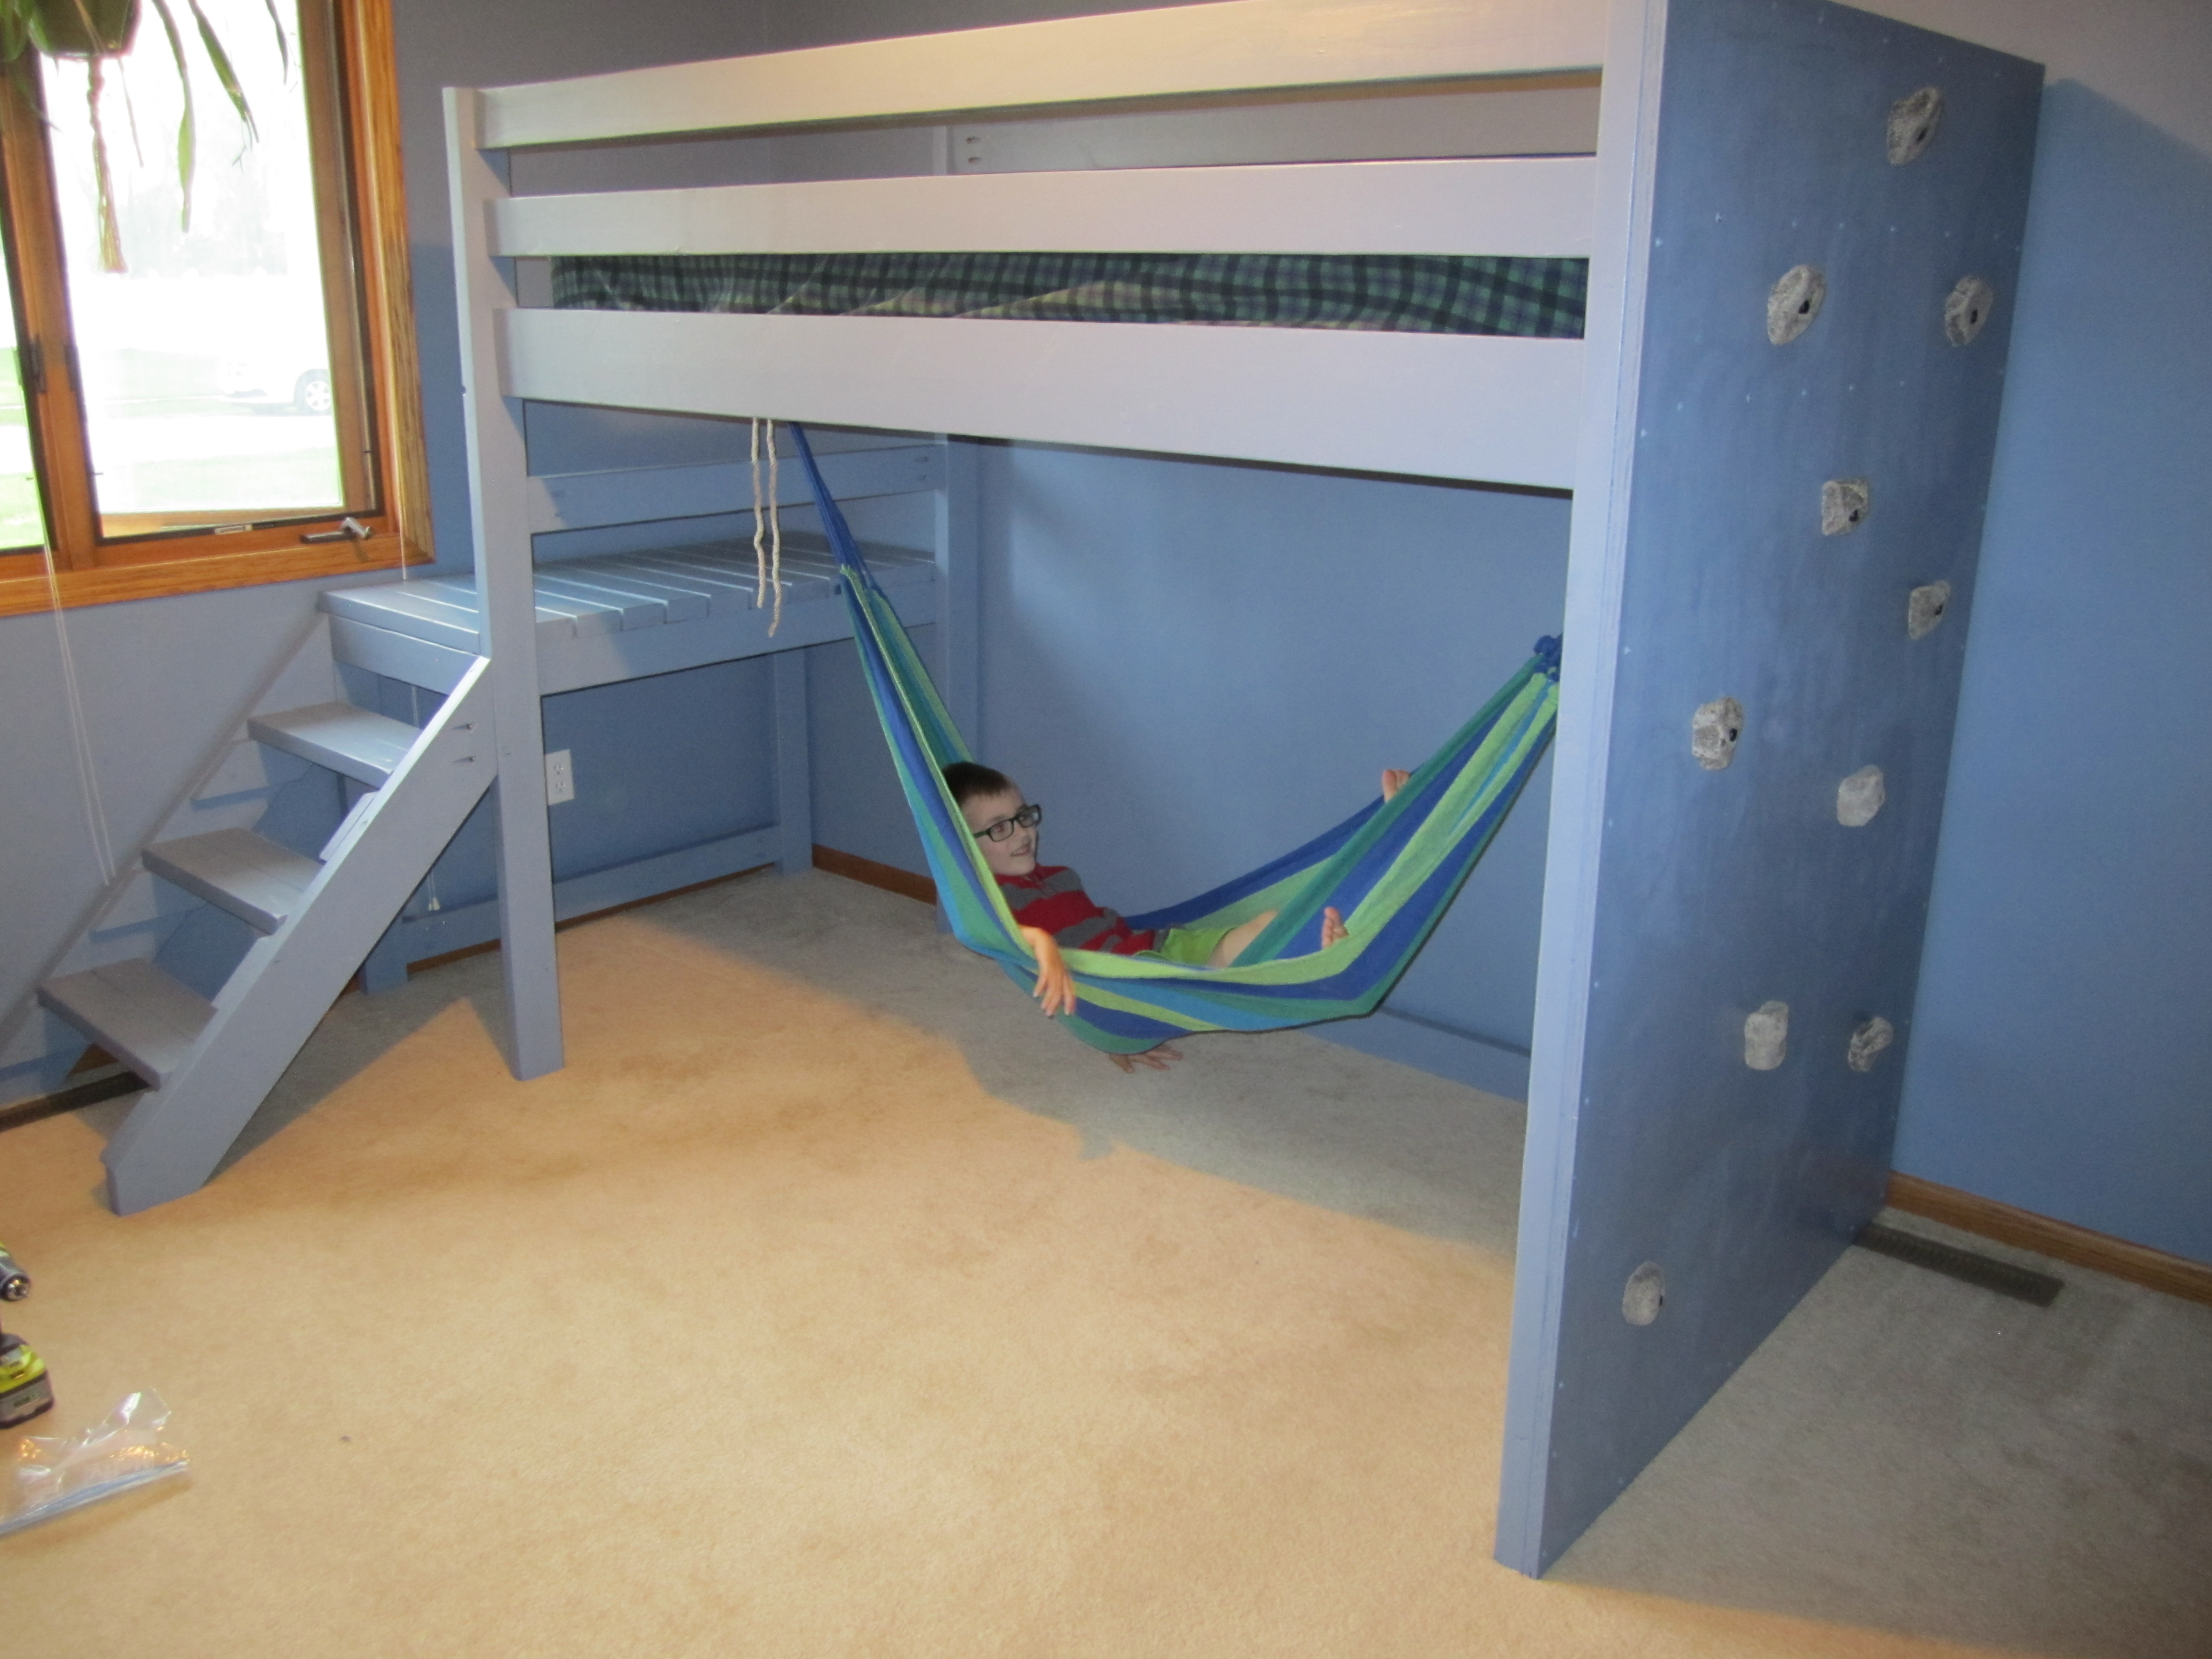 Camp Loft Bed With Rock Wall Ana White, Hammock Under Bunk Bed